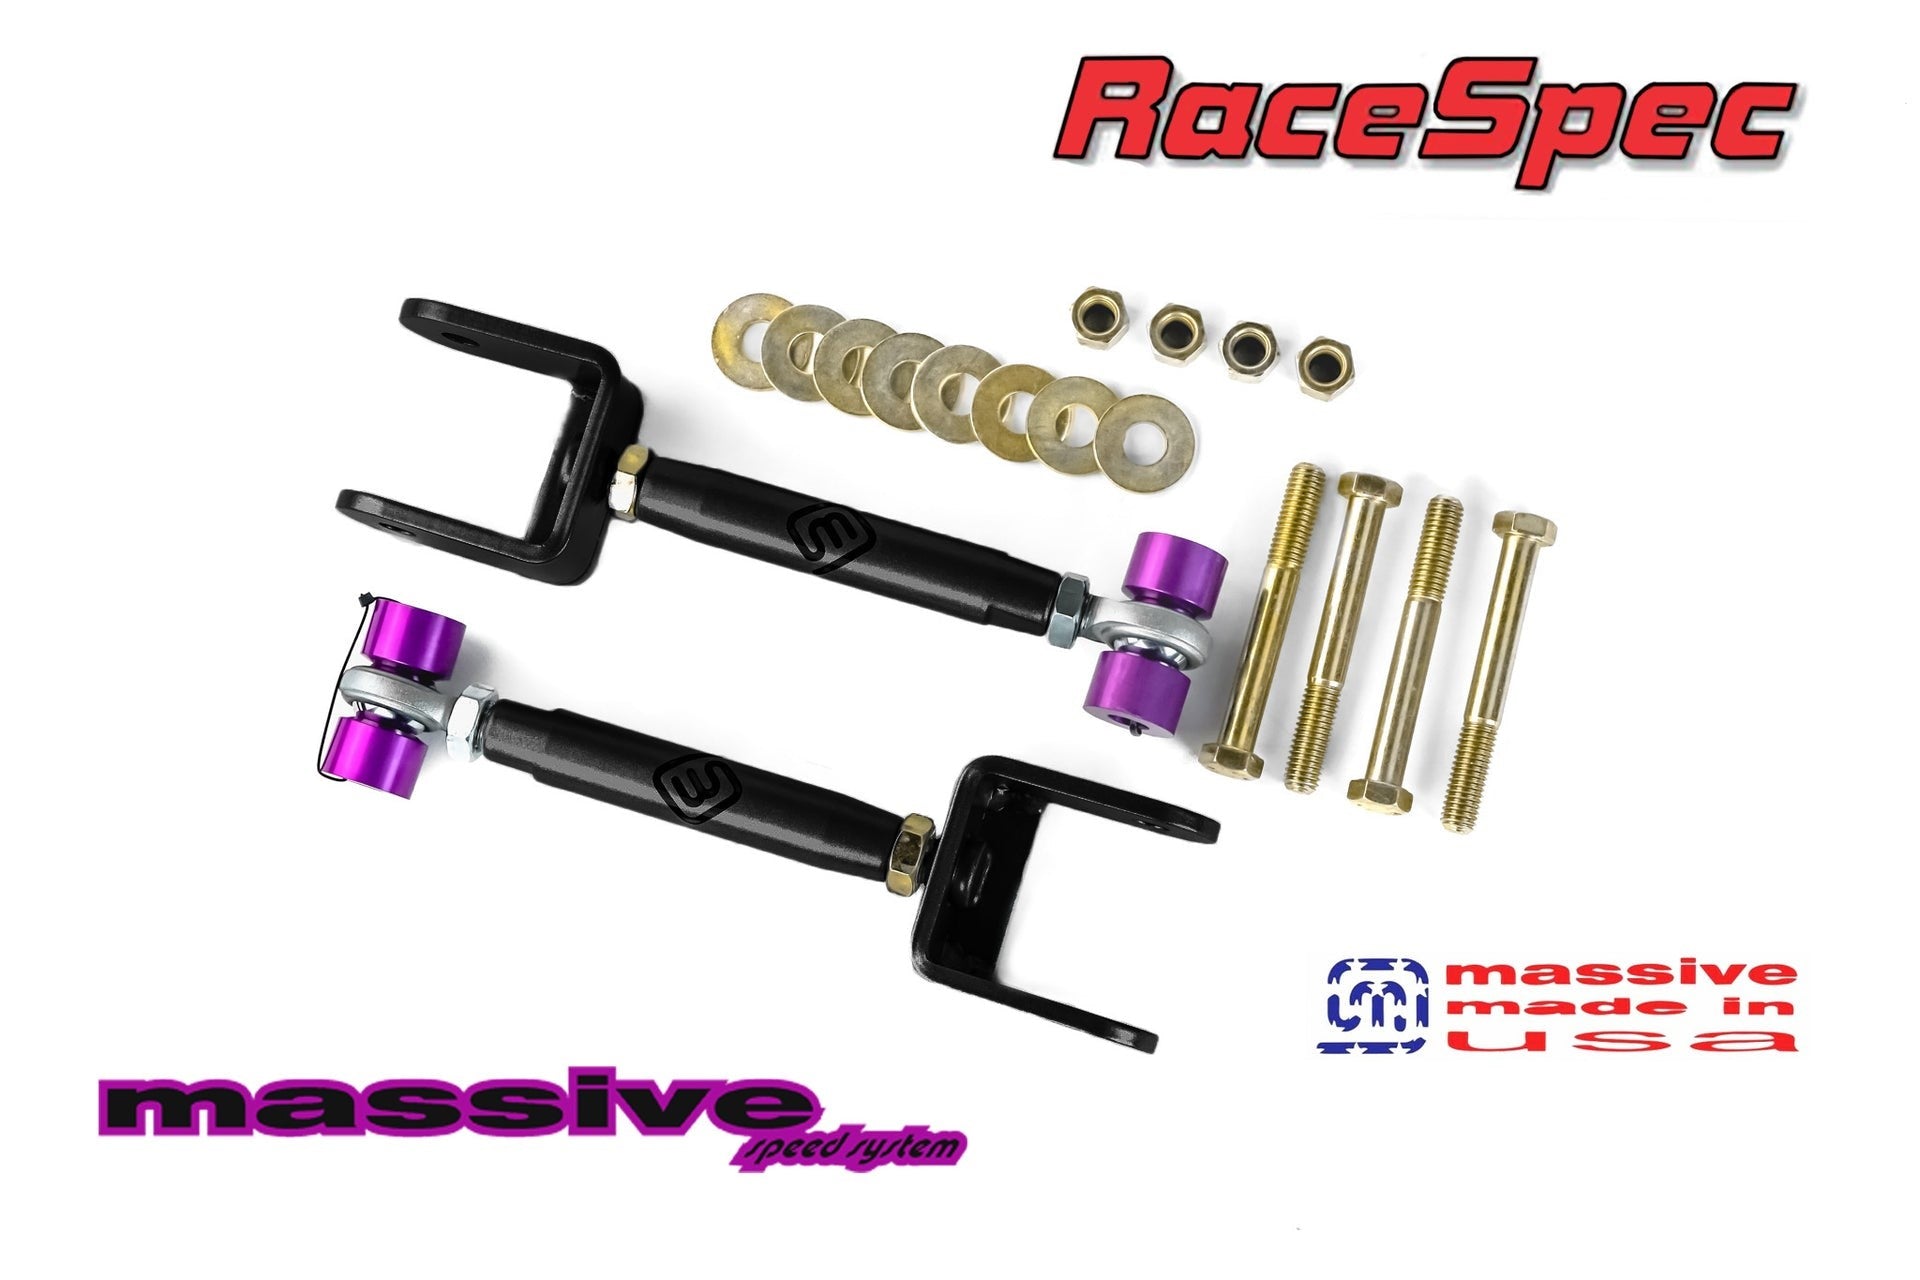 Reasons To Consider Adjustable Trailing Arms?